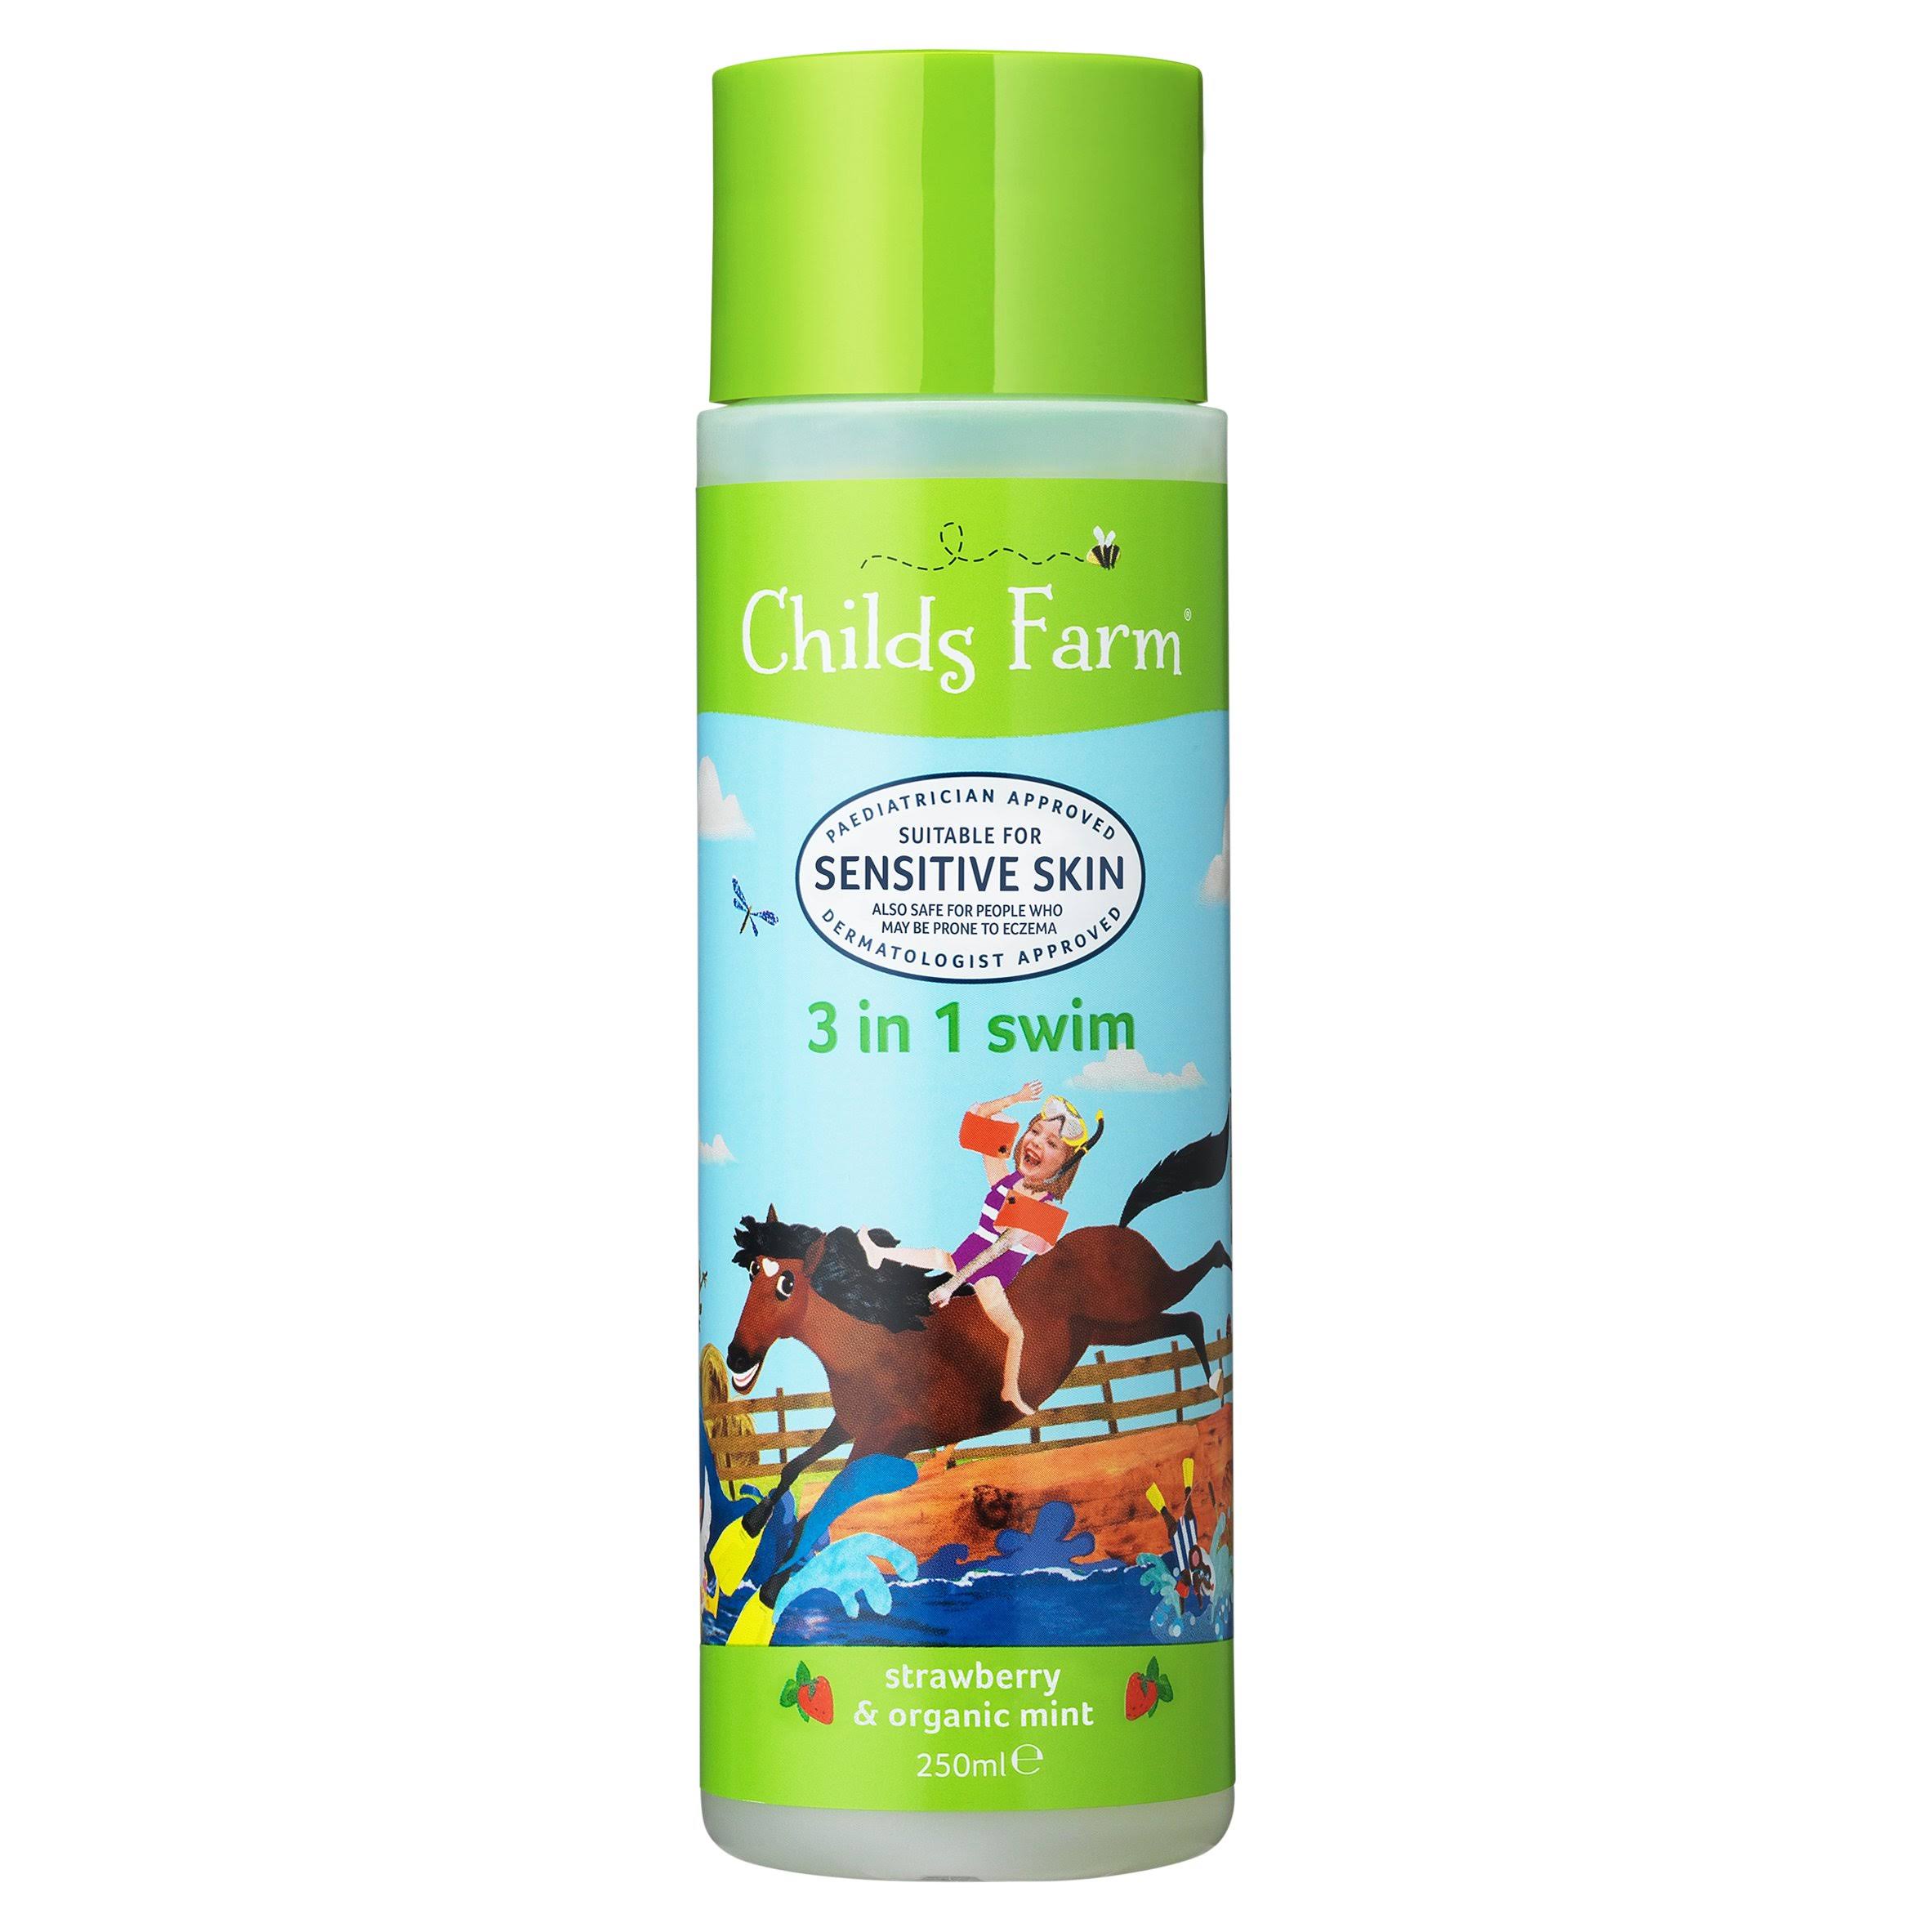 Childs Farm 3 in 1 Swim Care - Strawberry and Organic Mint, 250ml